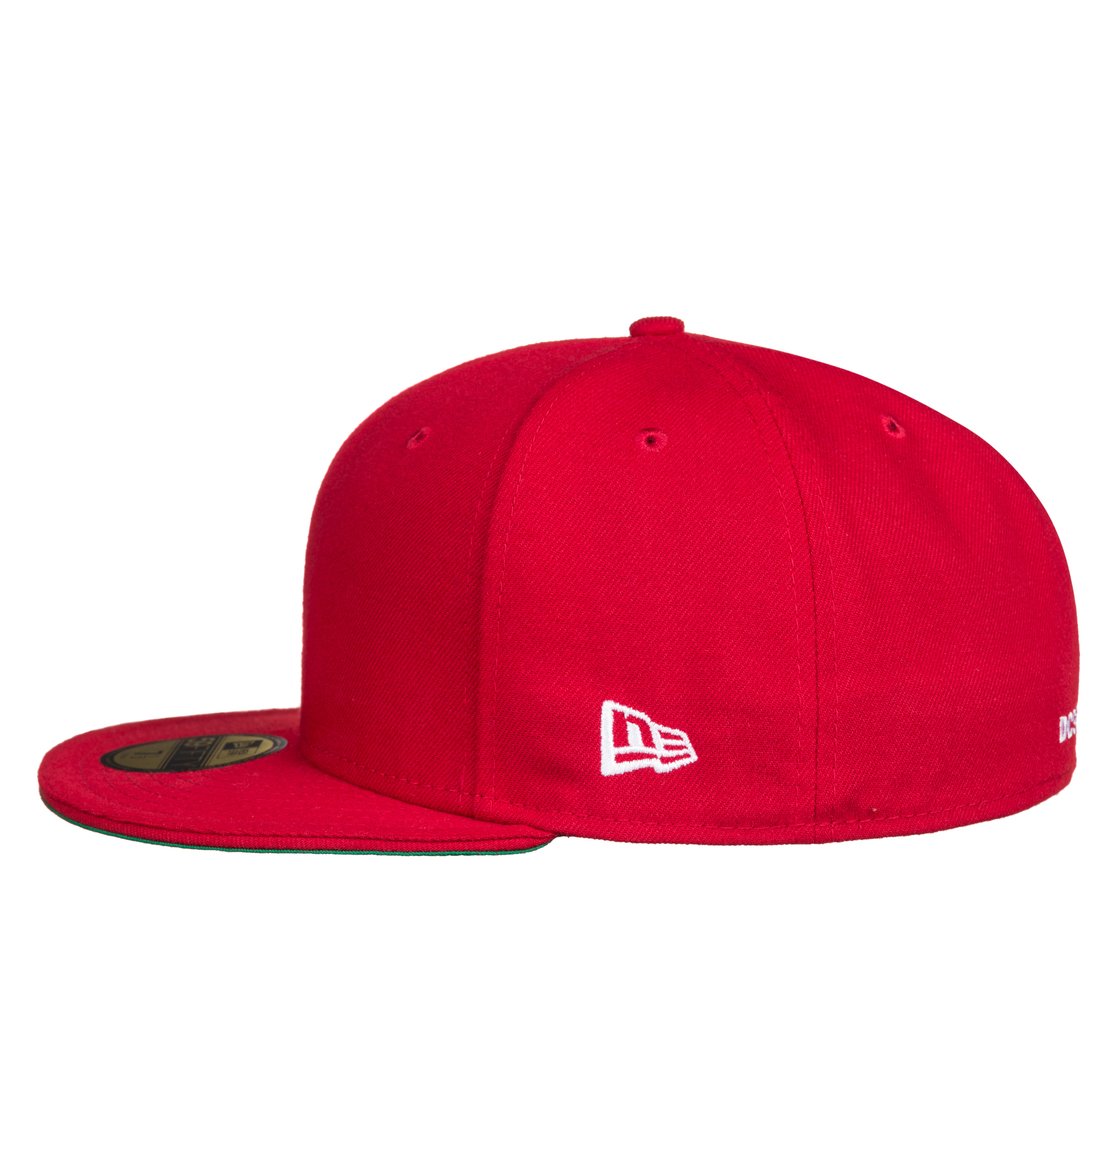 Skate - Fitted Cap for Men 3613373912442 | DC Shoes